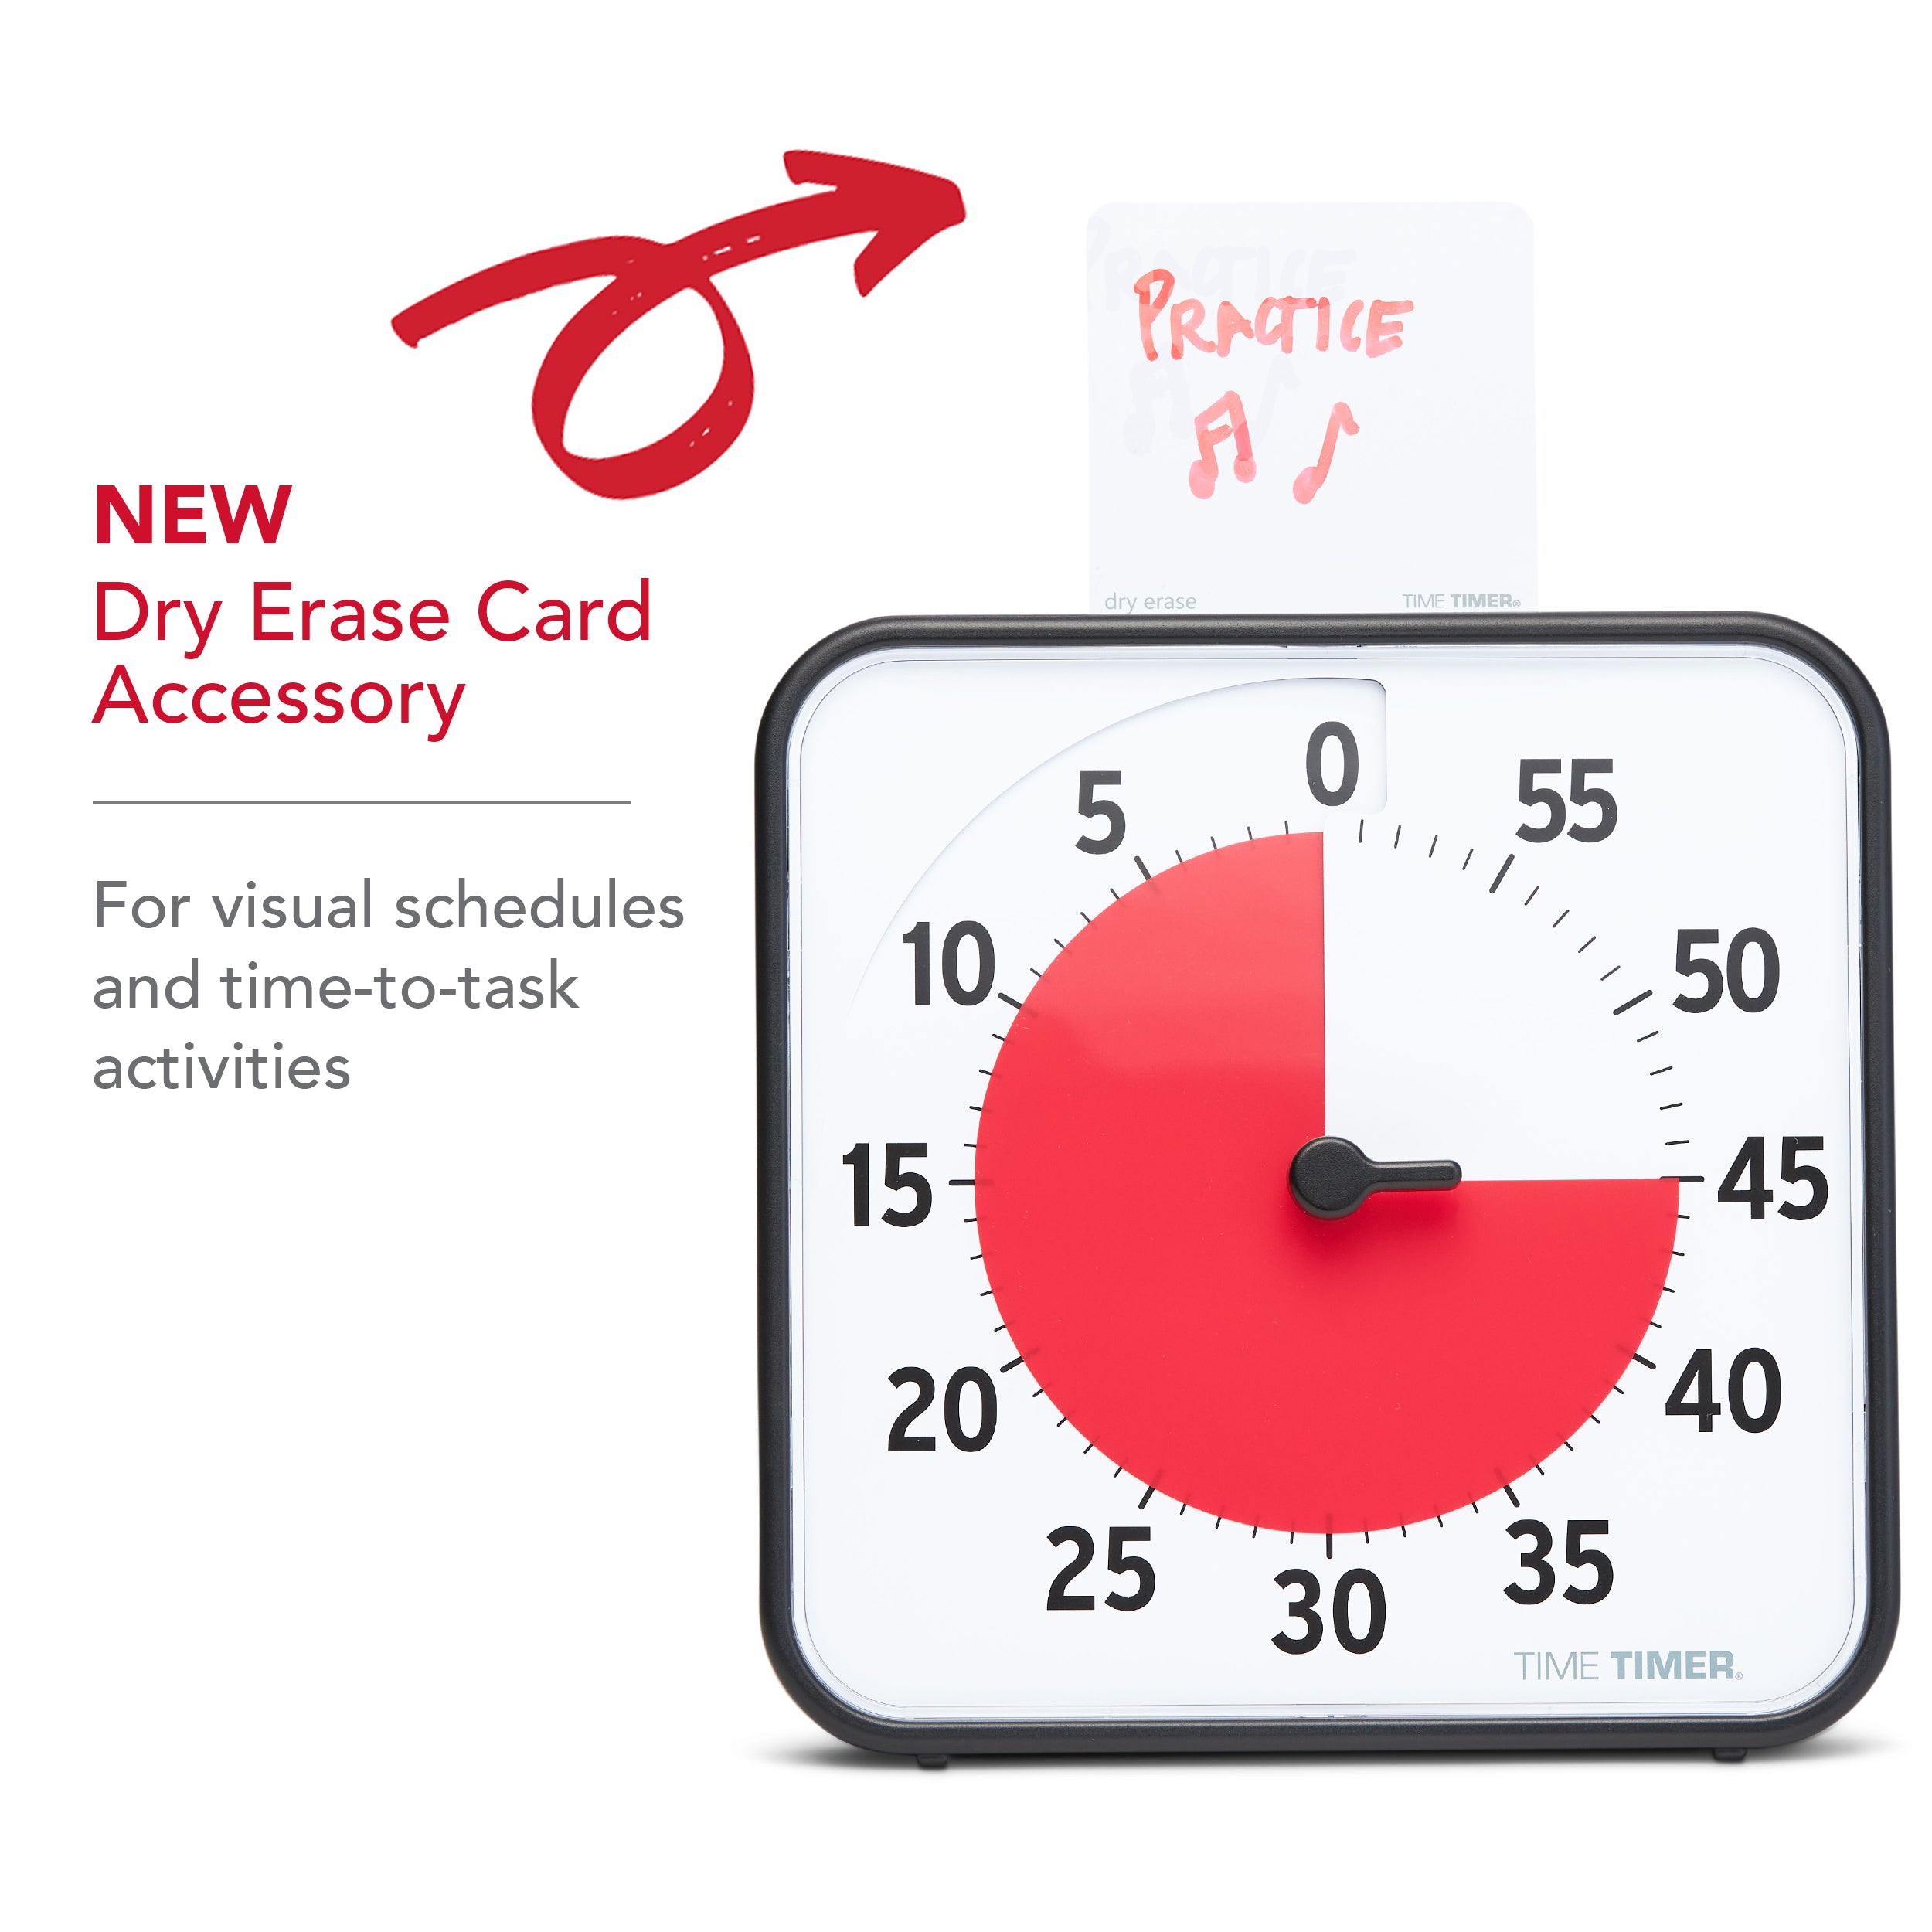 The Time Timer Original 8" visual timer is shown facing forward with the new dry erase card accessory for the Time Timer® Original 8”. The Dry Erase card shows the word "Practice" with musical notes drawn nearby. A graphic states "New Dry Erase Card Accessory: For Visual Schedules and time-to-task activities."